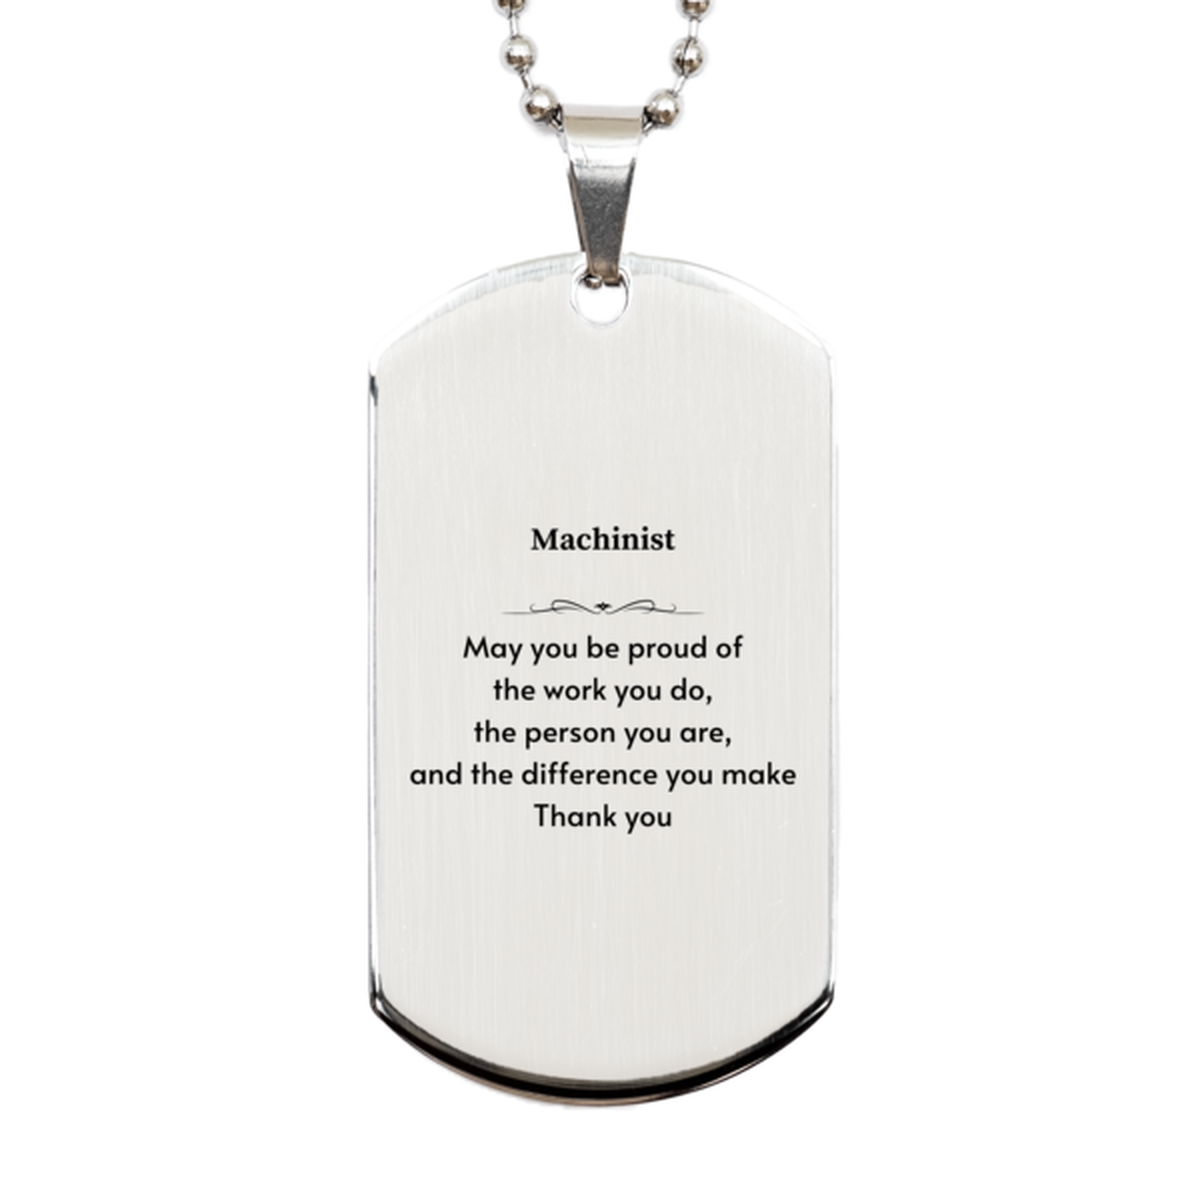 Heartwarming Silver Dog Tag Retirement Coworkers Gifts for Machinist, Machinist May You be proud of the work you do, the person you are Gifts for Boss Men Women Friends